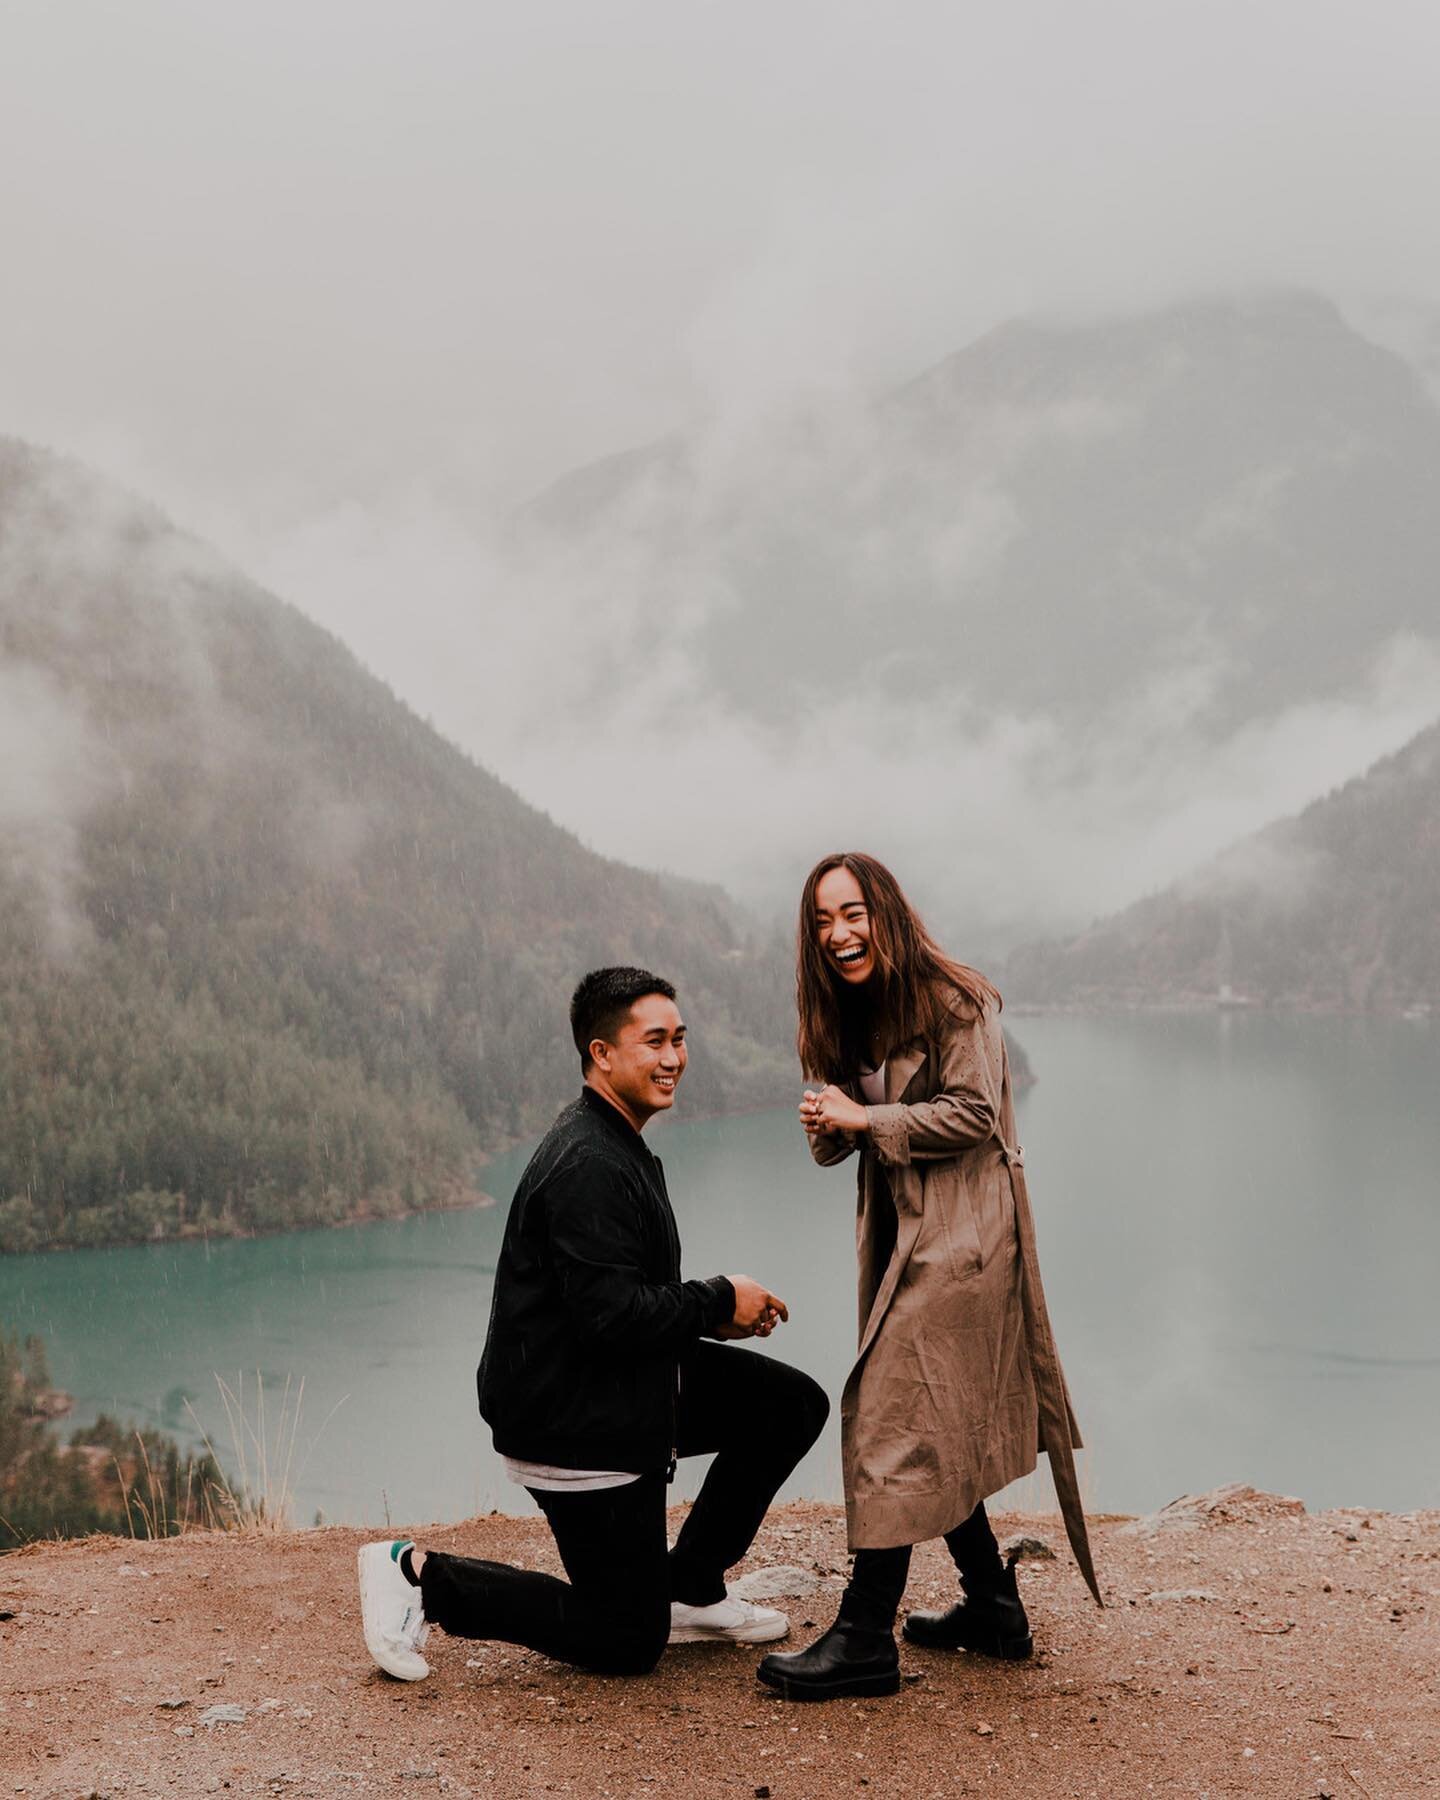 'Rain or Shine' is the law of the land in the PNW. John knew he wanted to propose at this epic spot - so we braved the rain and it was more perfect than I could have imagined. And yes that grin was on her face the whole day 